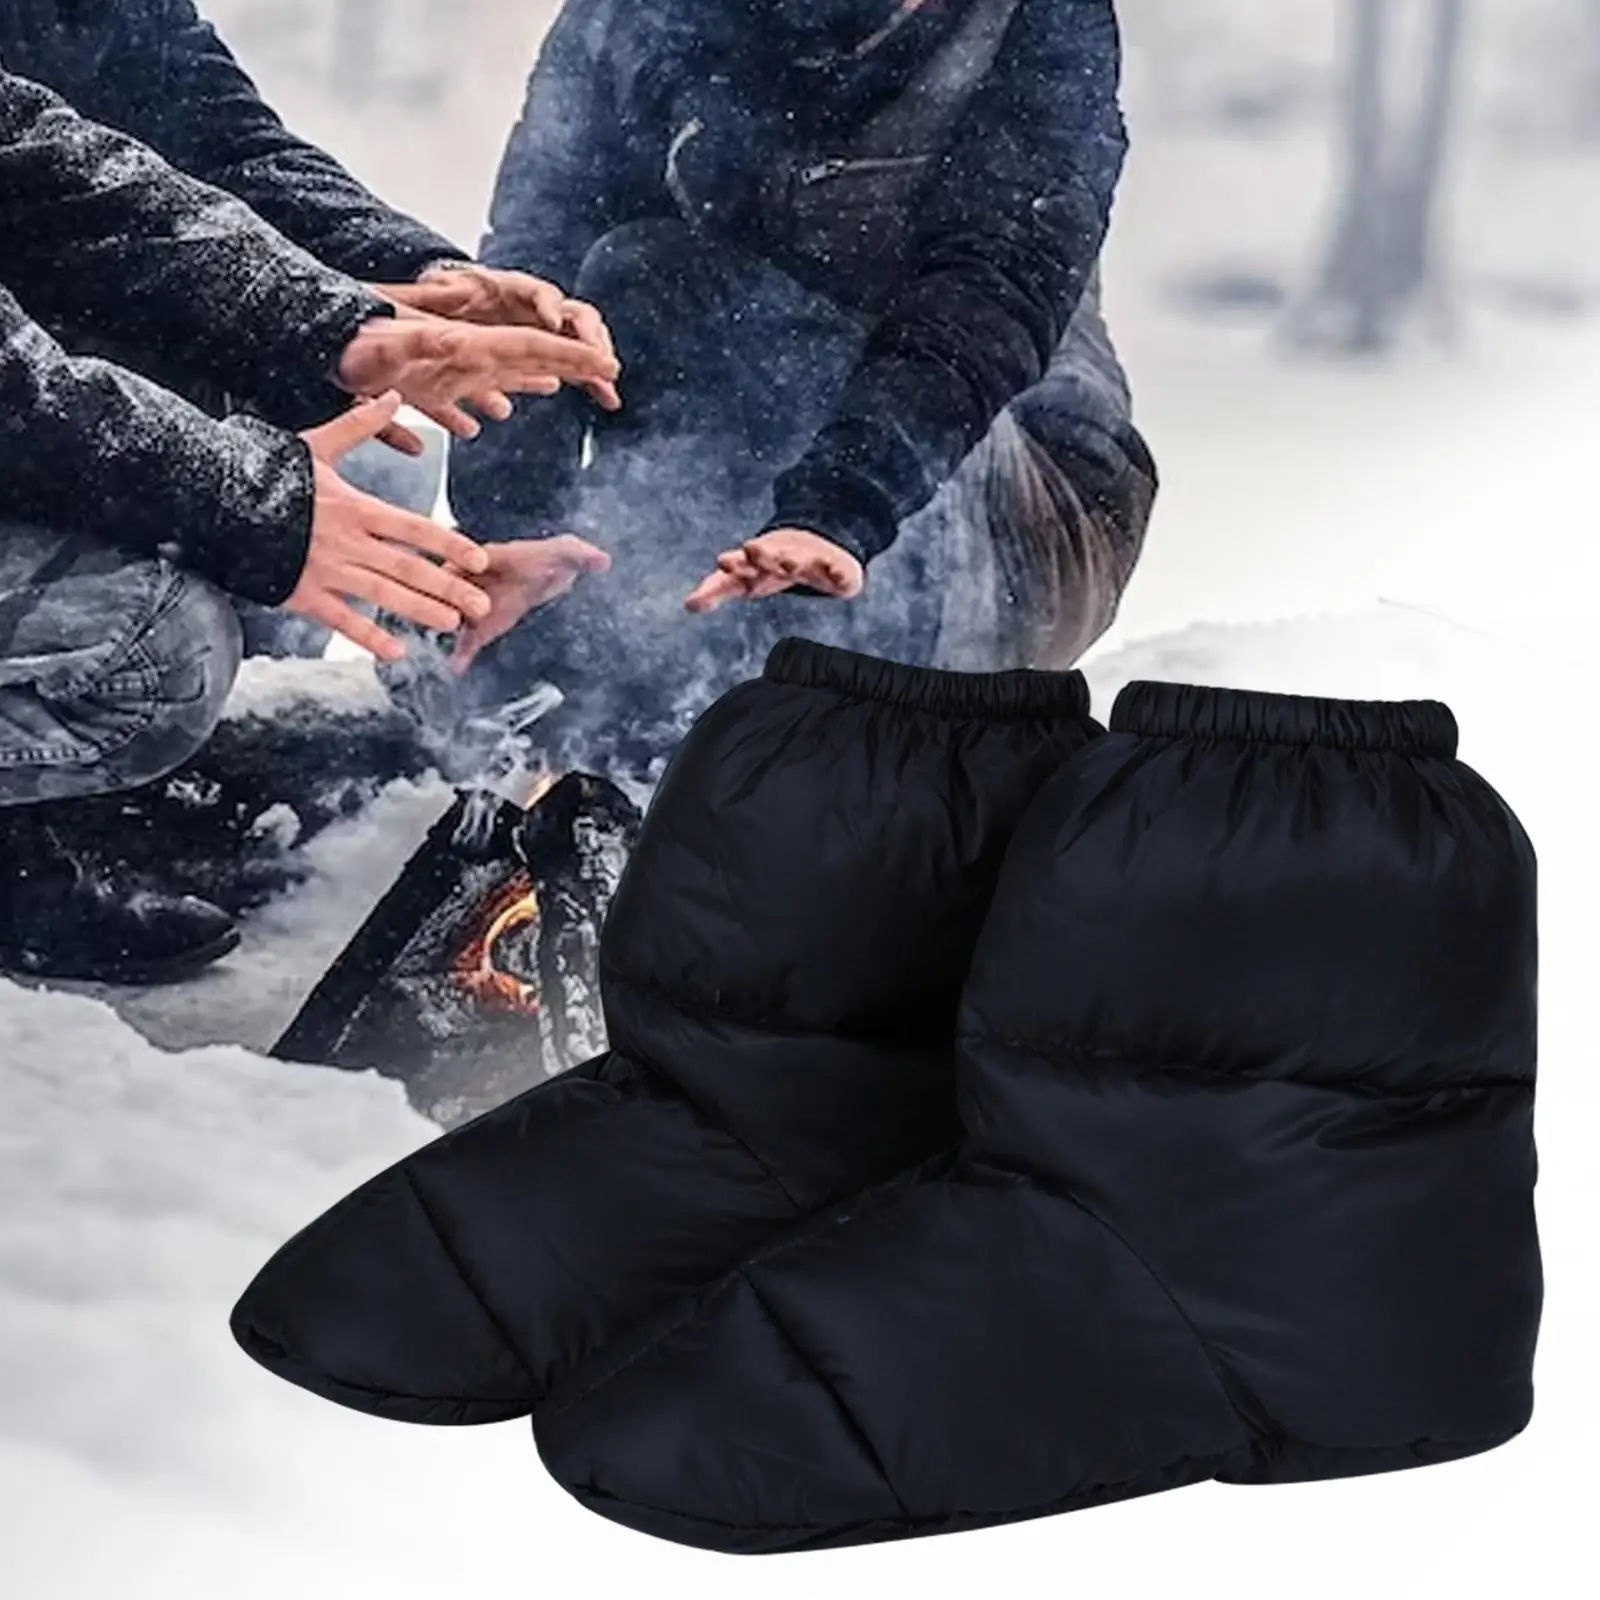 Winter Down Slippers Warm Bootie Shoes Comfortable Lightweight Ankle Snow Boots for Skiing Bedroom Backpacking Fishing Outdoor